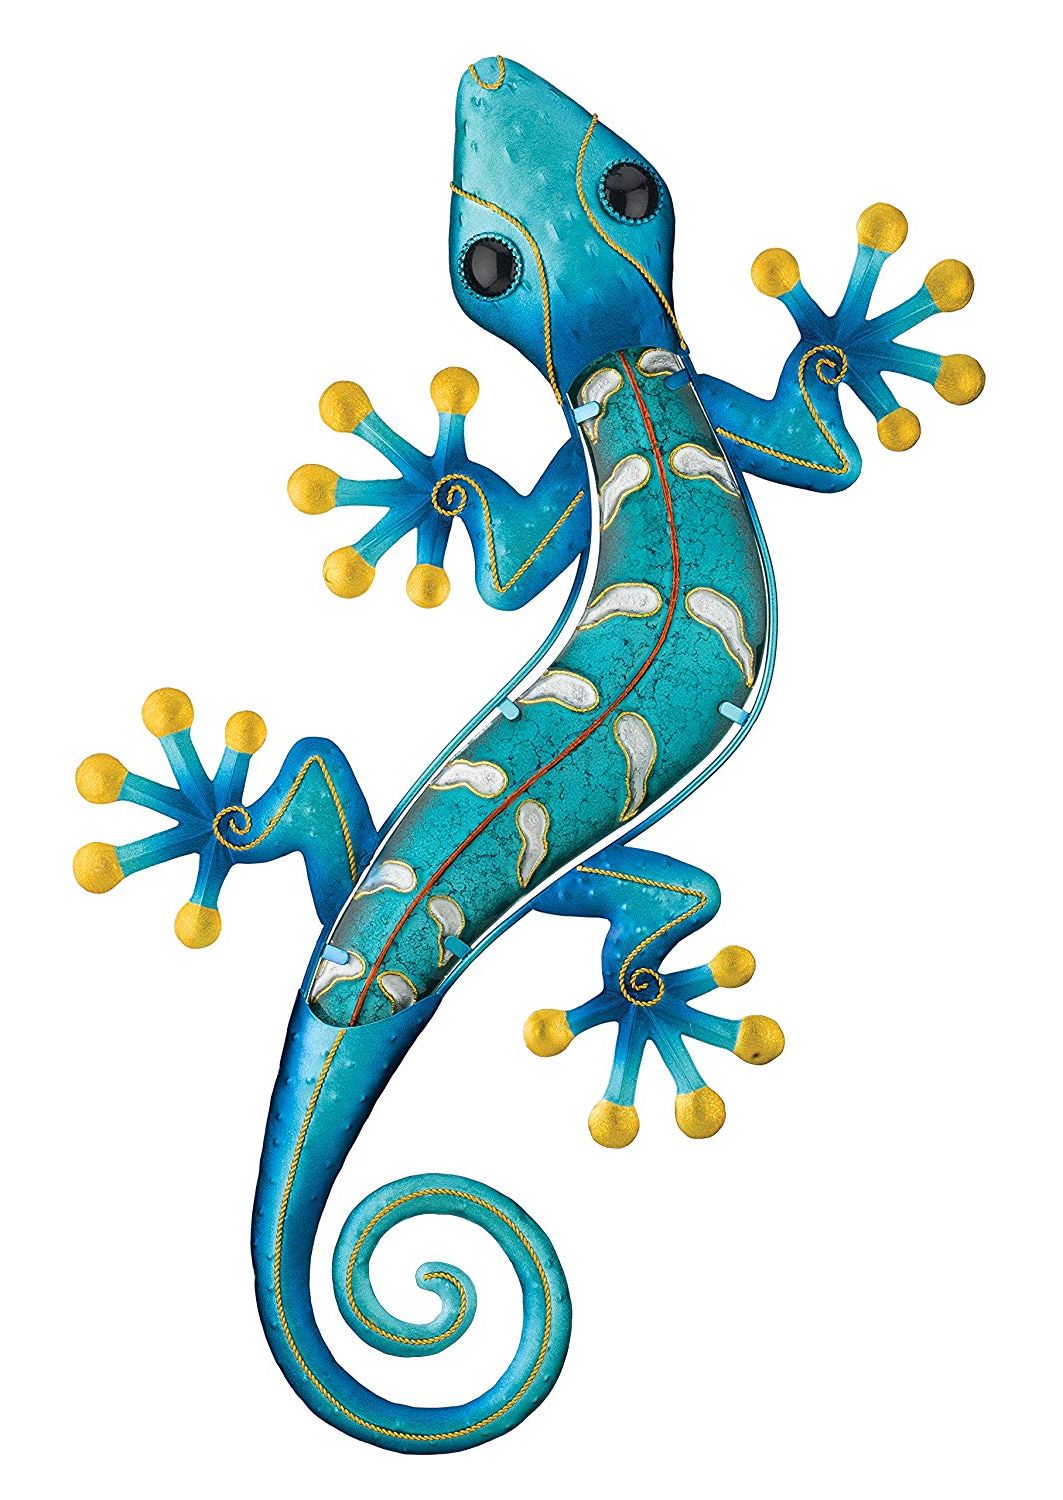 Amazon: Regal Art & Gift Gecko Wall Decor, 24 Inch, Blue: Home Intended For 2019 Gecko Wall Decor (View 1 of 20)